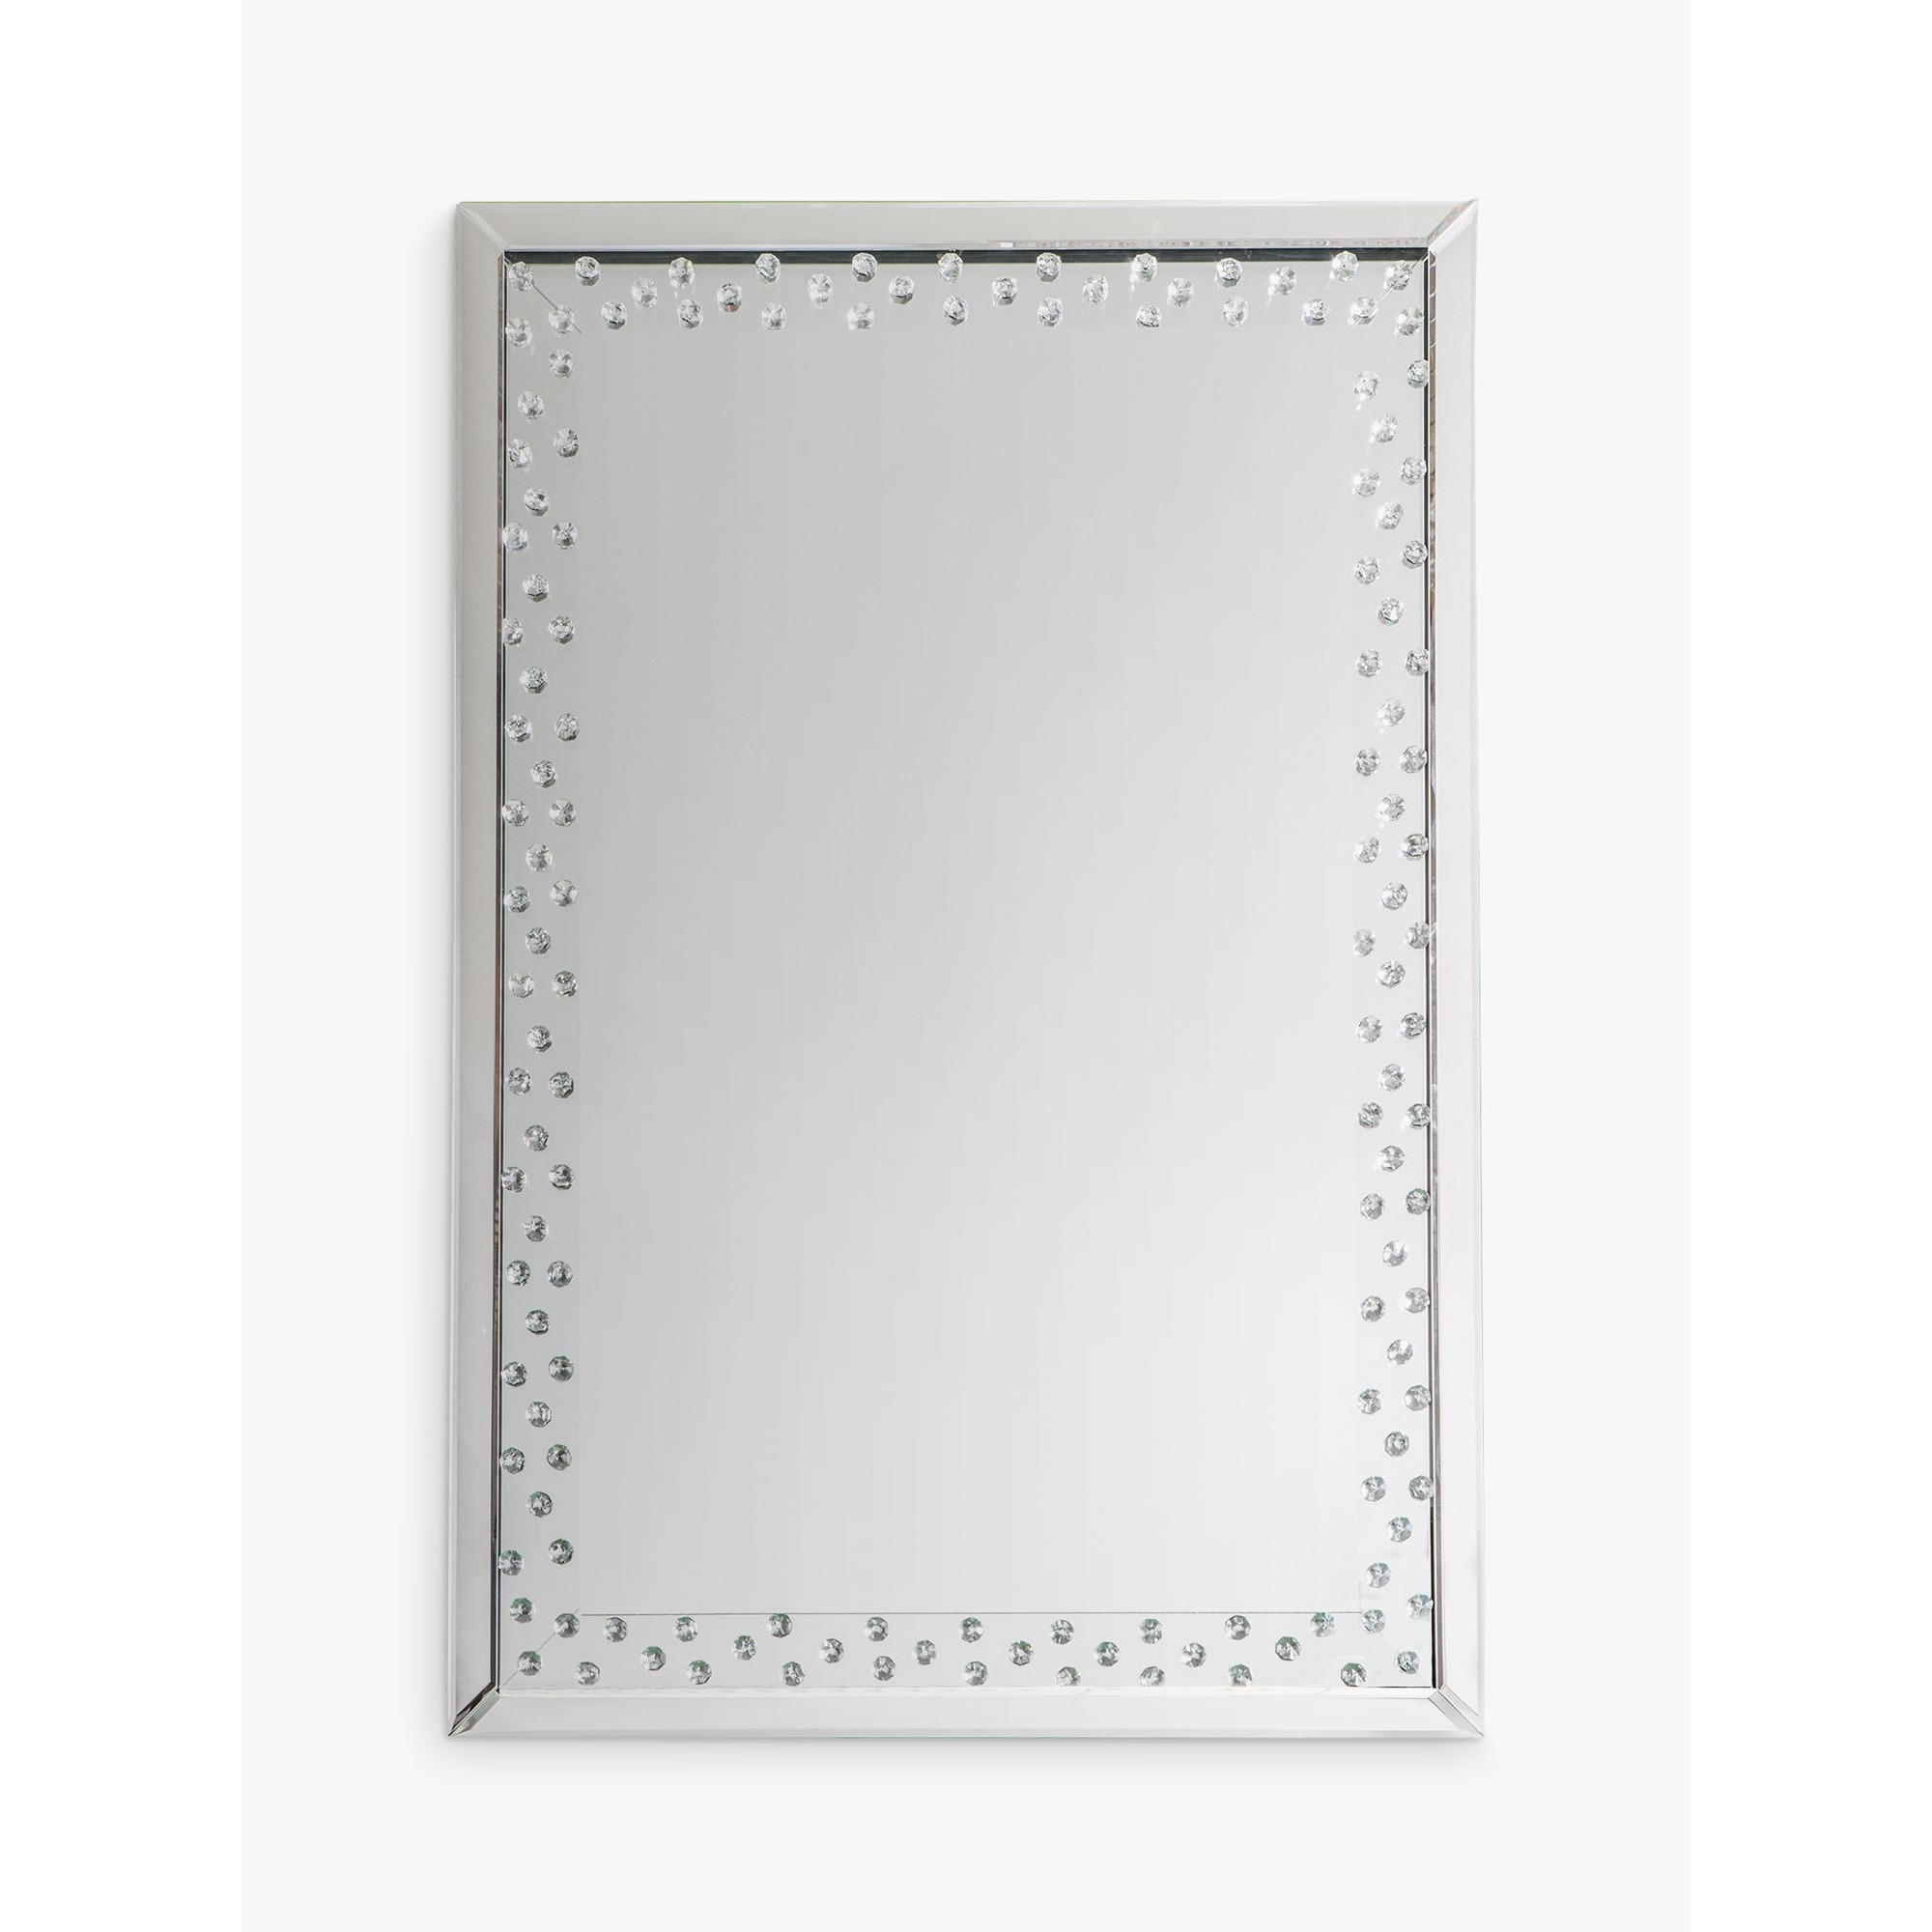 Gallery Direct Eastmoor Rectangular Decorative Crystals Glass Frame Mirror, Clear - image 1